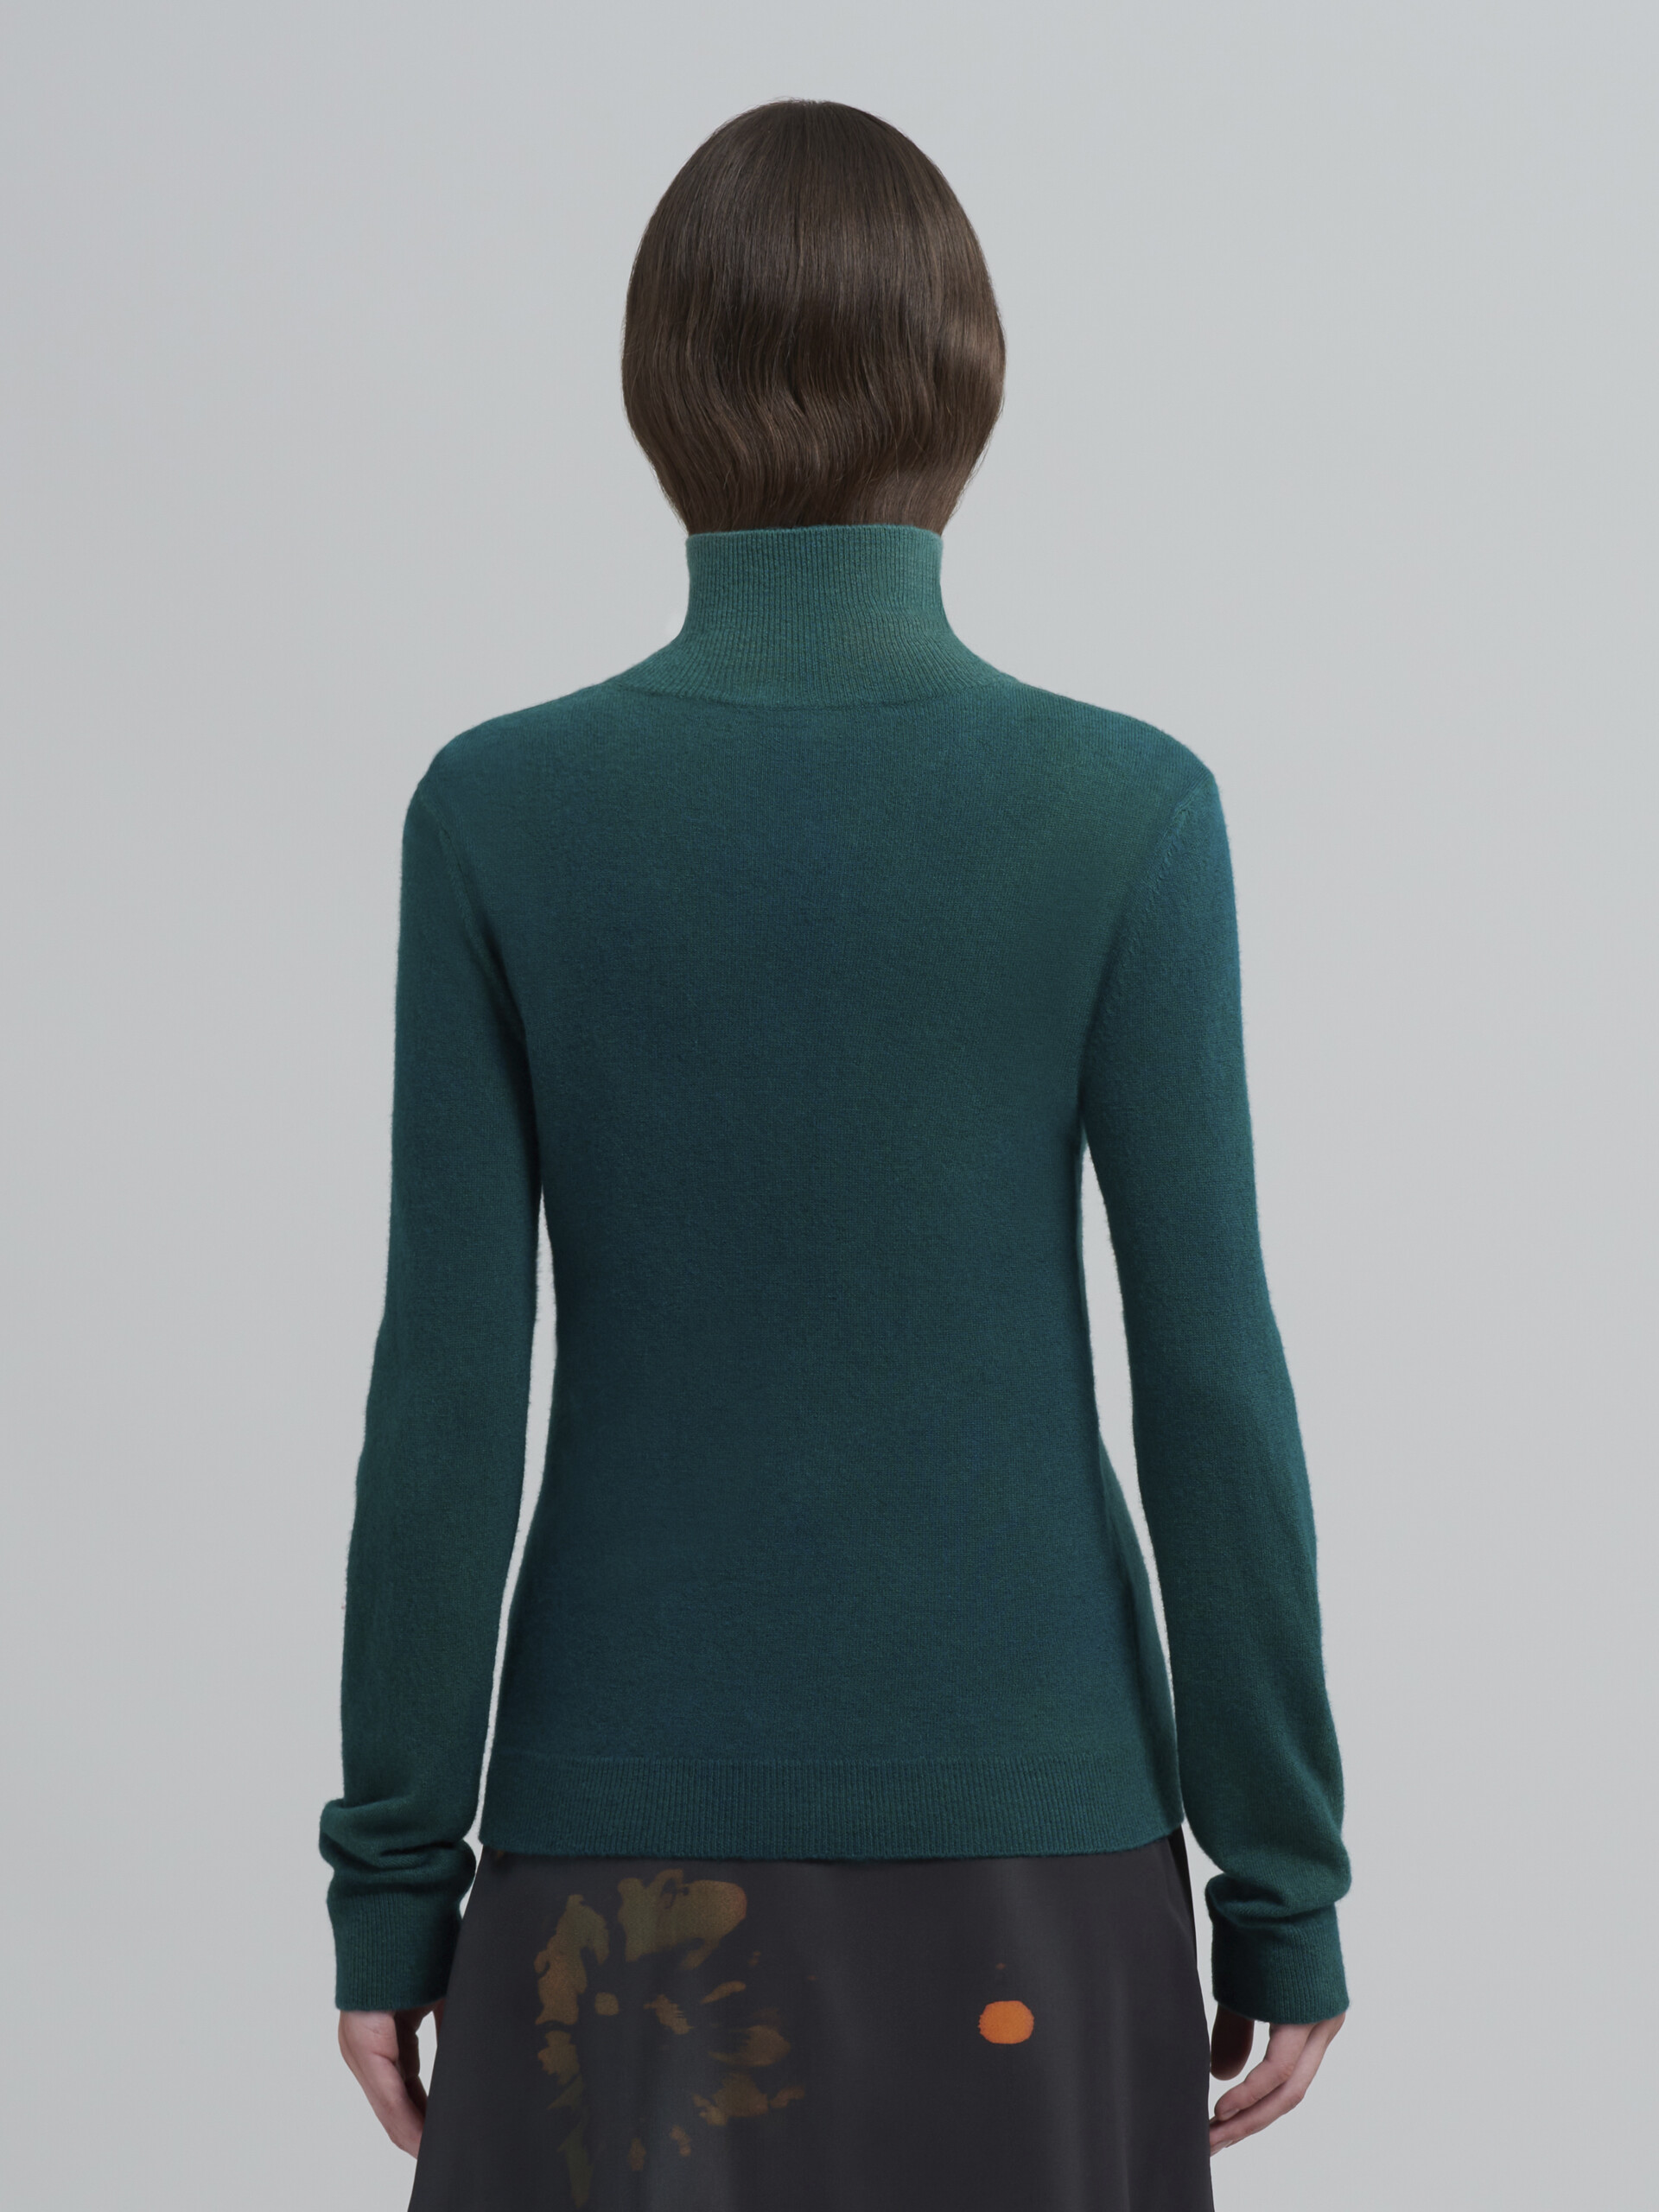 Hand-dyed virgin wool sweater - Pullovers - Image 3